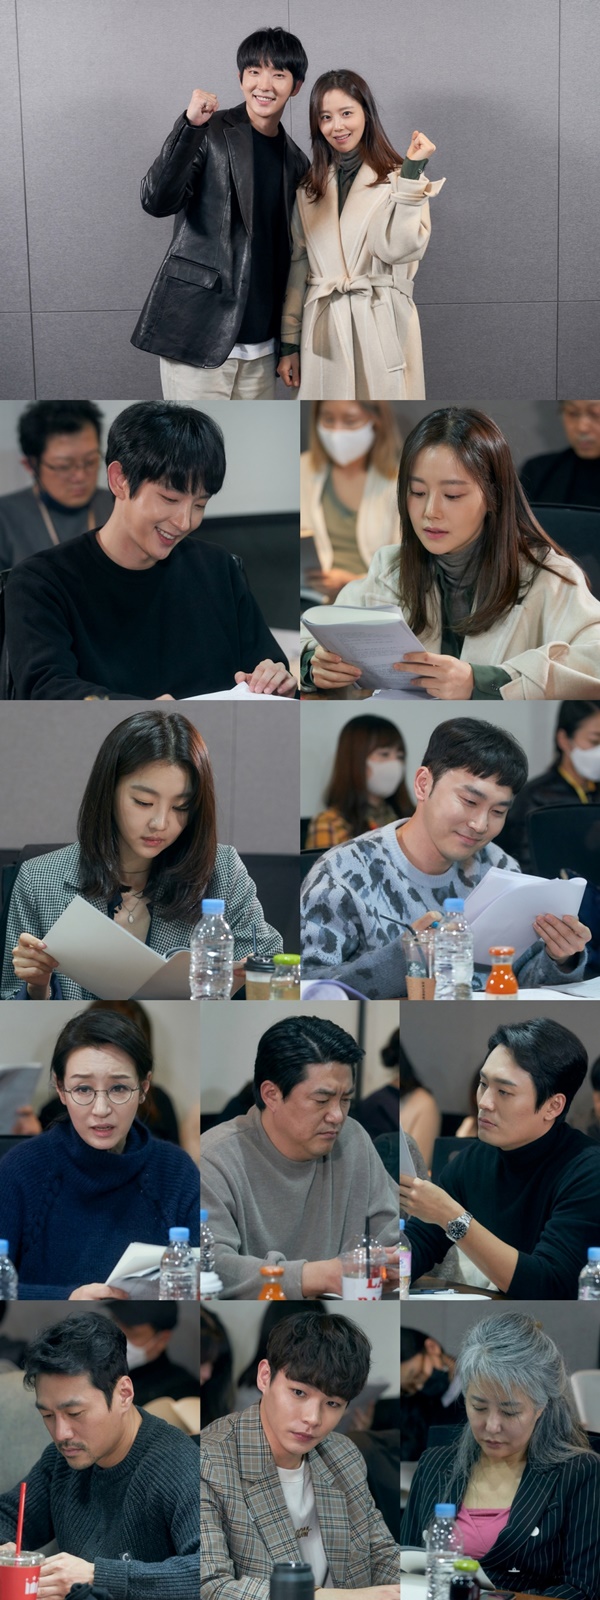 TVNs new Wednesday-Thursday evening drama The Flower of Evil has unveiled a promising golden lineup along with the Transcript Reading scene, featuring Lee Joon-gi, Moon Chae-won, Jang Hee-jin and Seo Hyeon-woos Hot Summer Days.TVNs new Wednesday-Thursday evening drama The Flower of Evil (playplayplayed by Yoo Jung-hee, director Kim Cheol-gyu) is a powerful detective who tracks his past with Baek Hee-sung (Lee Joon-gi), a man who has changed his identity and hides his brutal past. It is a high-density emotional tracking drama of two people who stand in front of the truth that they want to ignore.In the Transcript Reading scene, which announced the start of the full-scale voyage, director Kim Chul-gyu of the luxury director who goes to and from melodrama and thriller, writer Yoo Jung-hee, who is attracting attention with his solid writing power, Lee Joon-gi (played by Baek Hee-sung), Moon Chae-won (played by Cha Ji-won), Jang Hee-jin (played by Dohaesu), and Seo Hy Actors, who believed in the Eon-woo (played by Kim Moo-jin), were all in the spotlight.Lee Joon-gi said, I want to leave it as a work that will be remembered for a long time for viewers. Moon Chae-won also expressed his enthusiasm that he would do his best to show good acting as he met good works.Actors, who exchanged greetings in a cheerful atmosphere, began to bloom properly with Hot Summer Days, which immersed themselves in the roles and filled with the dialogue and emotions that they exchanged like Ping Pong.Lee Joon-gi, who was divided into Baek Hee-sung, a man who hid the past like a time bomb in the play, and even loved it, completed the breathtaking tightrope of the extreme, and Moon Chae-won showed a different act of acting with the double charm of his loving wife and charismatic powerful Detective.Above all, if the two melodramatic couple Chemie made the scene hot, the delicate Acting, which is suspicious of each other, filled the scene with breathtaking tension.In this way, Actors, who are not too much of a luxury actor, such as Kim Ji-hoon, Choi Byung-mo, Son Jong-hak, Nam Ki-ae and Yoon Byung-hee, who have a changing spectrum of Acting, will join together to increase their immersion.It is said that the production teams ambitious aspiration to make it impossible to let go of the tension as the additional impact figures continue to appear until the middle and late.In addition, the four-color, four-color, four-color, three-color, four-color, three-color, three-color, three-color, three-color, three-color, three-color, three-color, three-color, three-color, three-color, three-color, three-color, three-color, three-color, three-color, three-color, three-color, three-color, three-color, three-color, three-color, three-color, three-color, three-color, three-color, four-color, four-color, four-color, four-color, three-color, three-color,TVNs new Wednesday-Thursday evening drama Flower of Evil, which predicts the perfect sense of love synergy including Lee Joon-gi, Moon Chae-won, Jang Hee-jin, and Seo Hyeon-woo, as well as directing and scripting, will be broadcast for the first time in July.